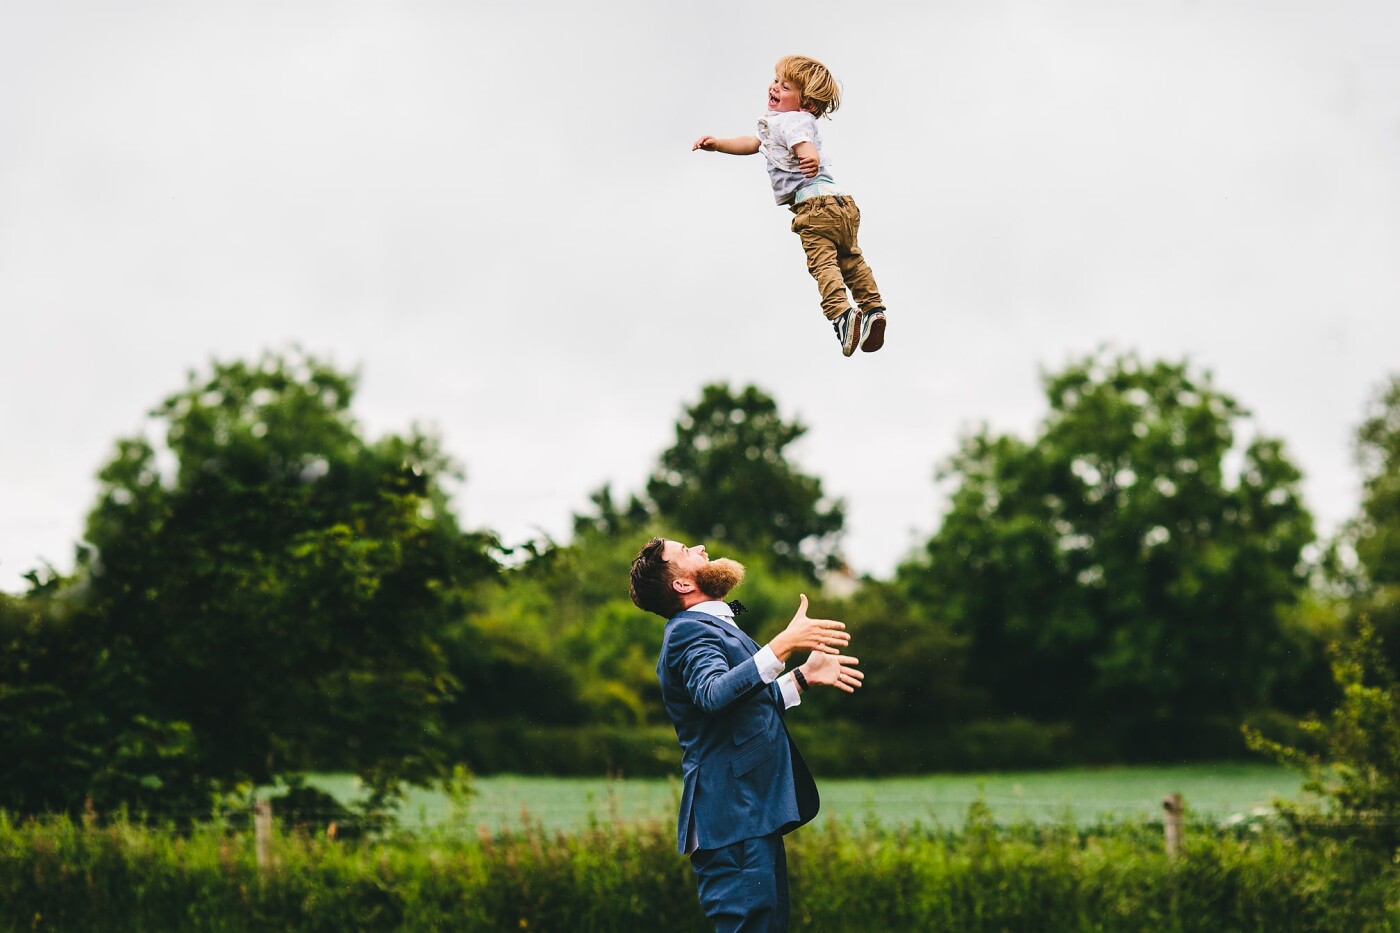 I heard it long before I saw it. The infectious giggle of a little person carried across the field where I was shooting, I turned the corner to find this dude being propelled high into the sky, laughing and chattering as he sailed through the air.